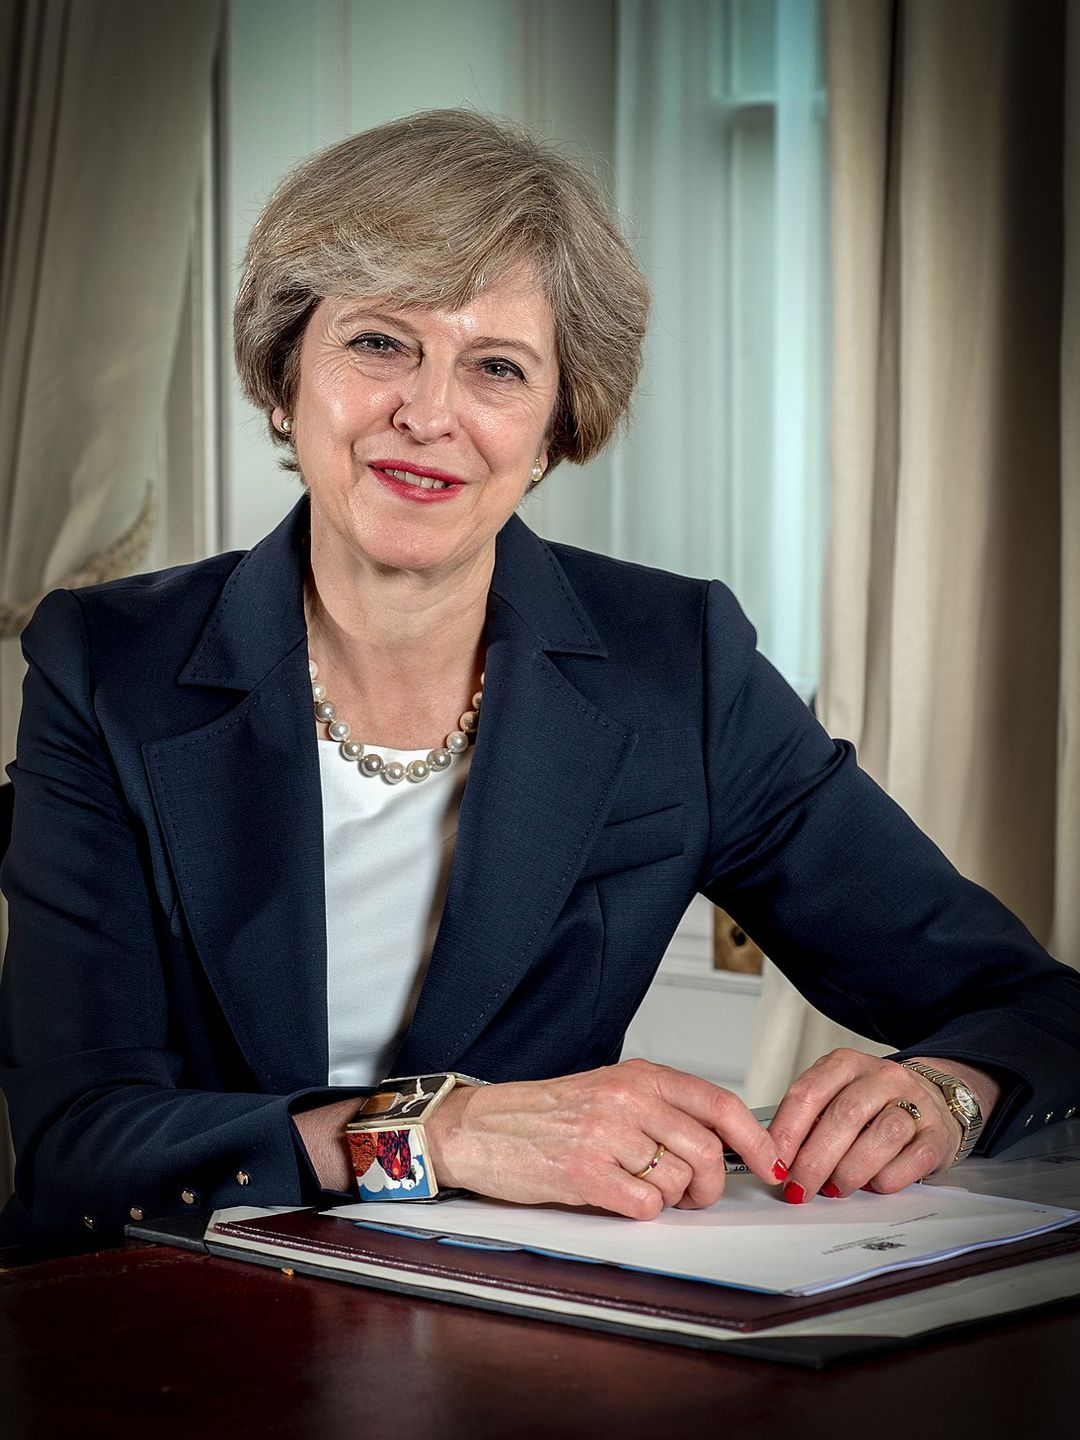 Theresa Mary May who are her parents